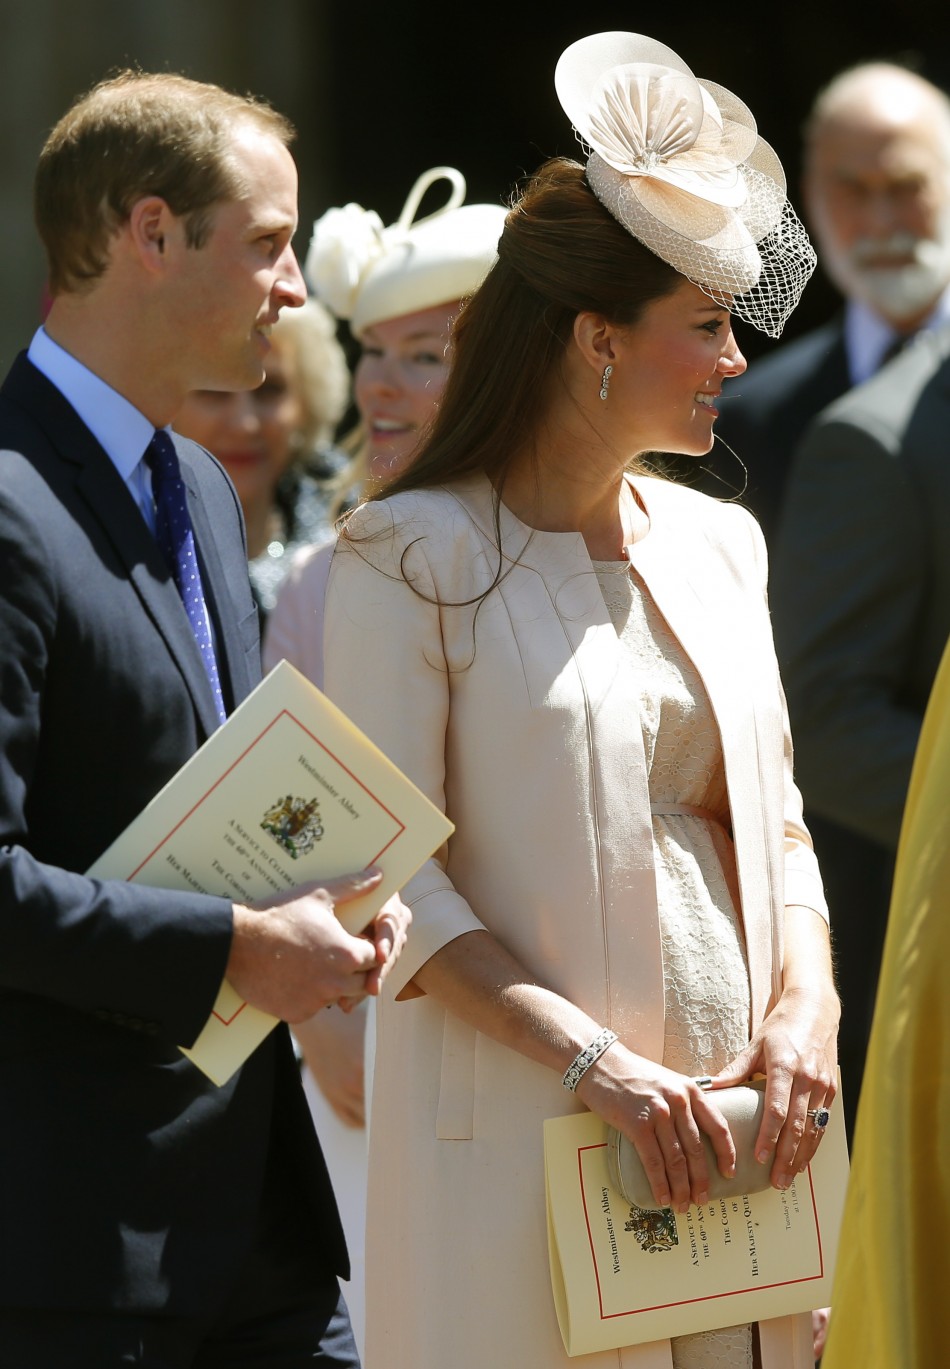 Catherine, Duchess of Cambridge has won kudos for her maternity fashion choice for the ceremony and her knack for repeating items she has worn before